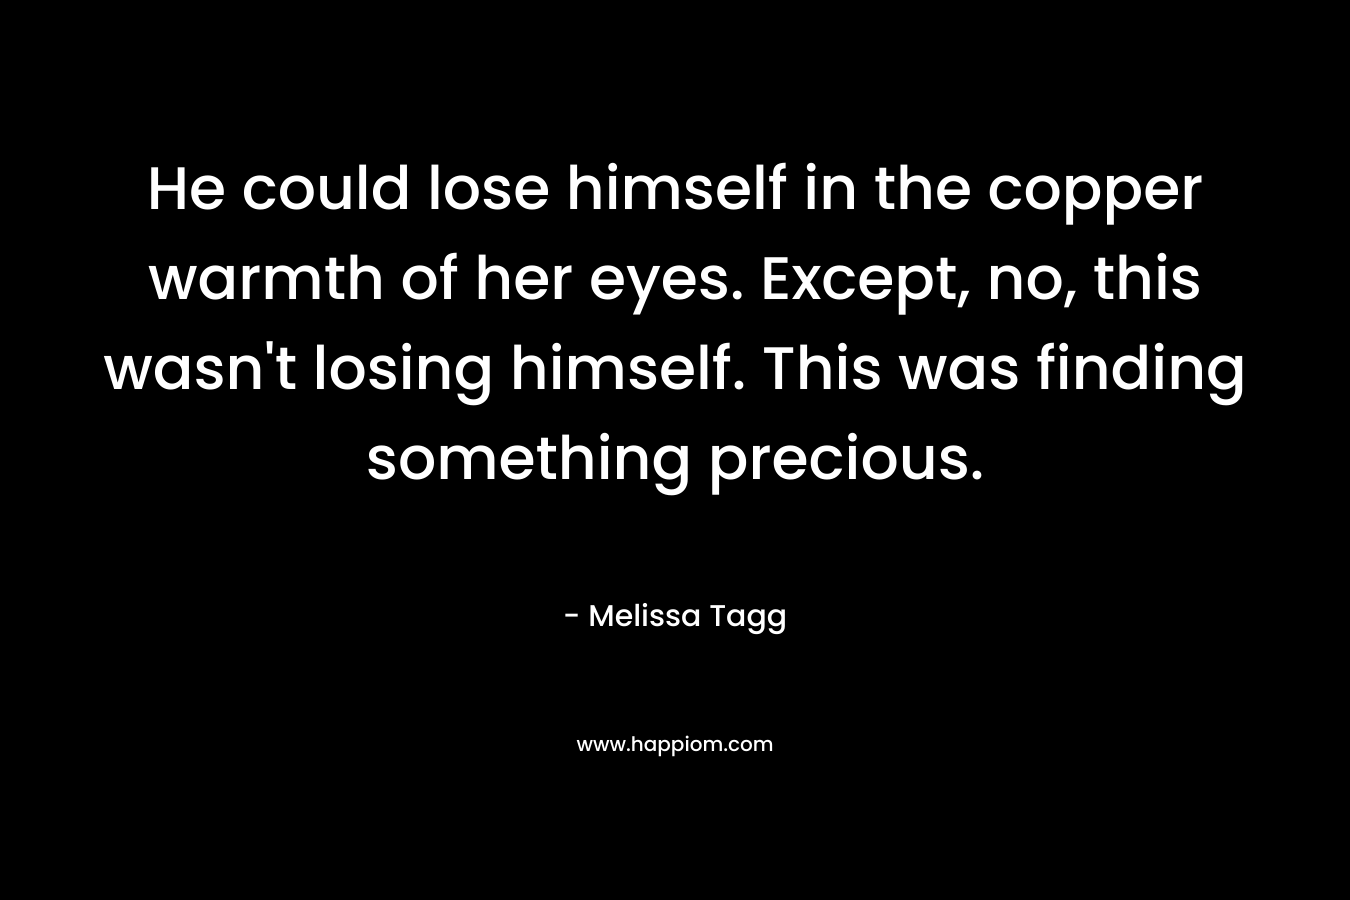 He could lose himself in the copper warmth of her eyes. Except, no, this wasn’t losing himself. This was finding something precious. – Melissa Tagg